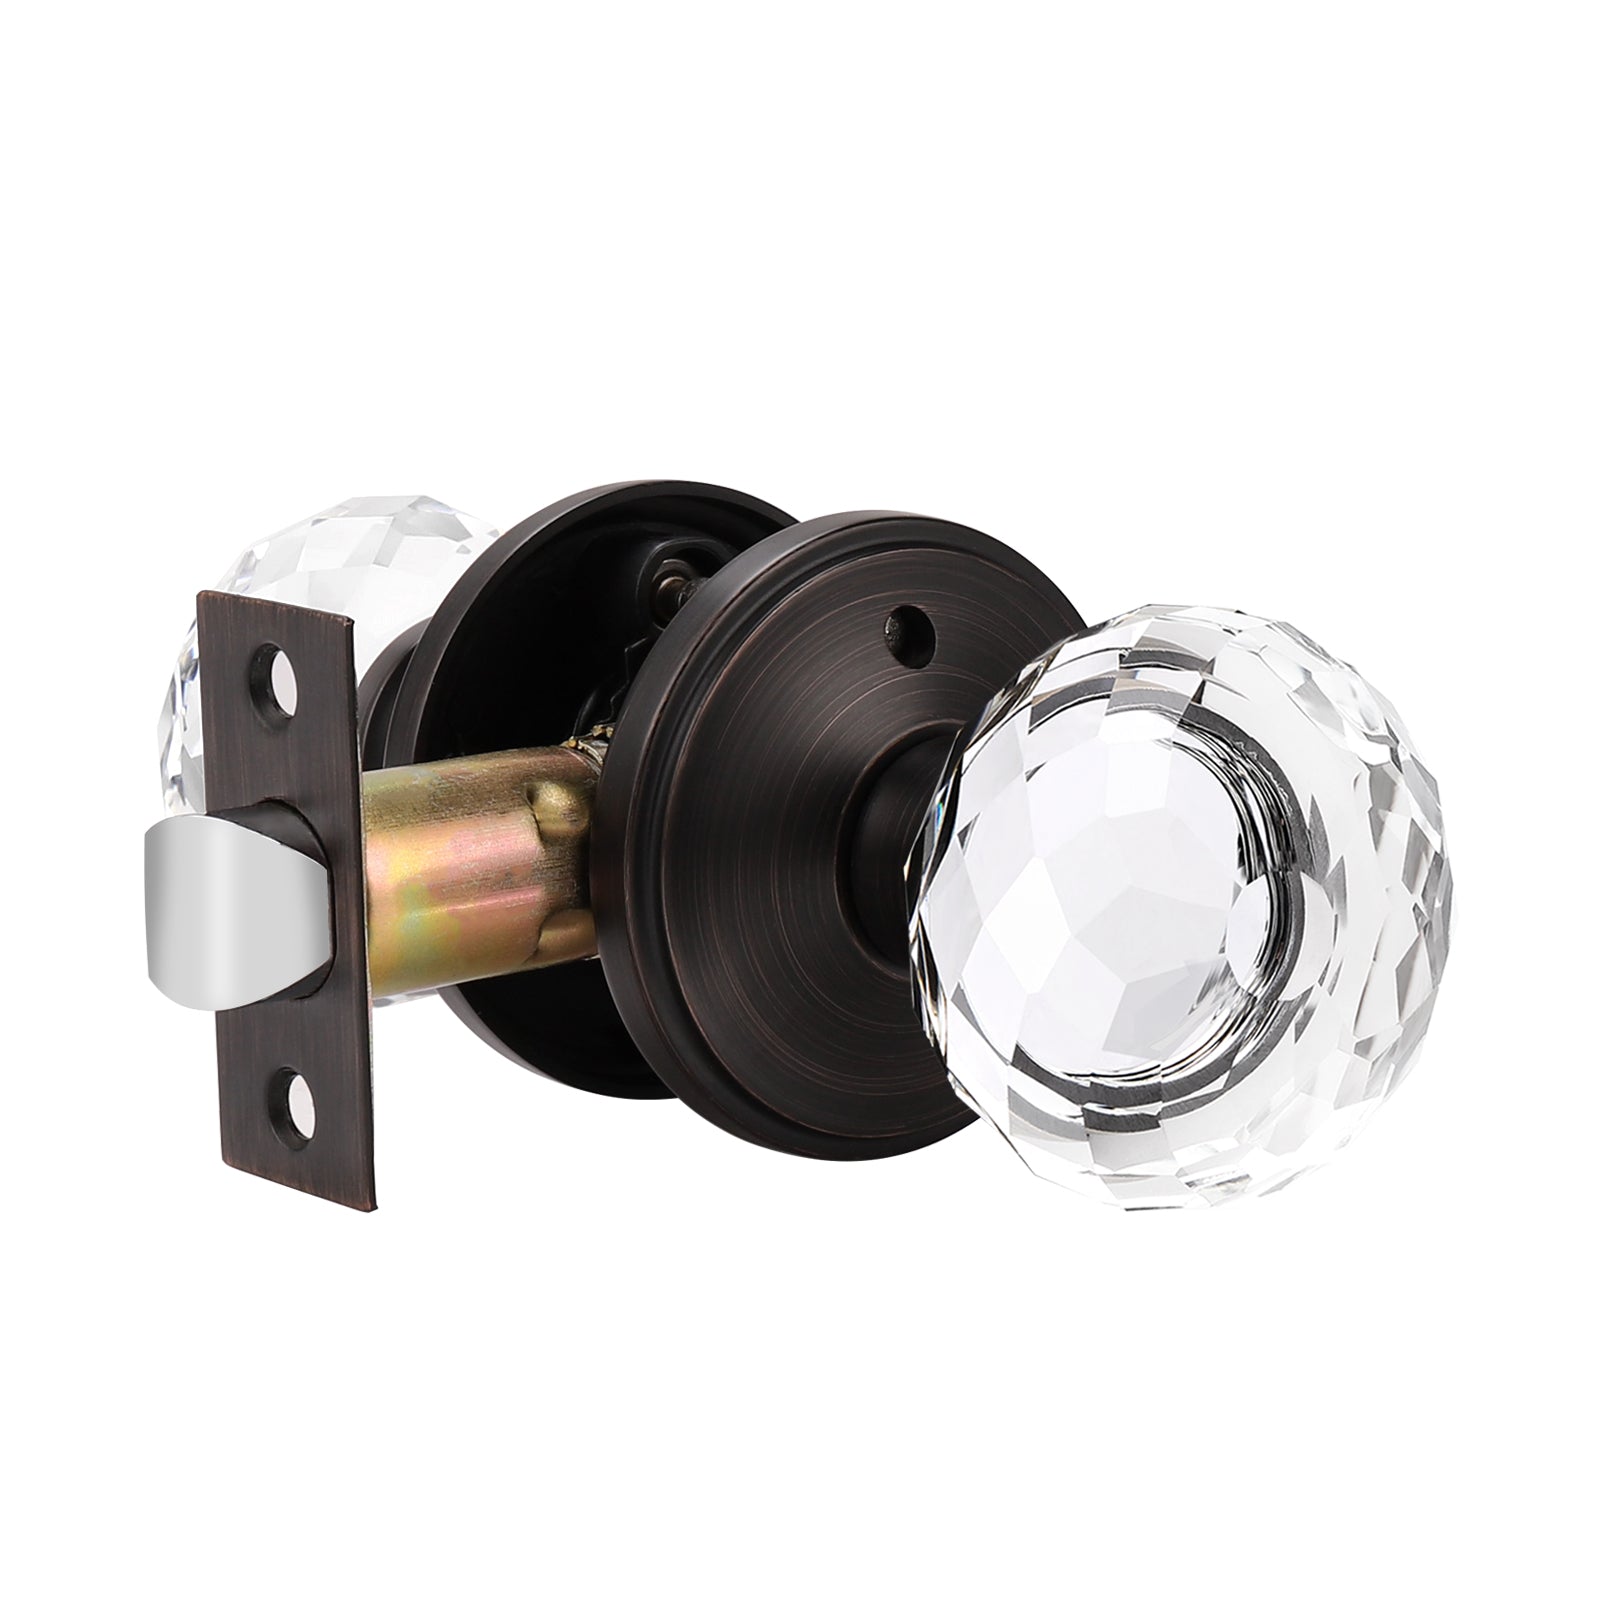 Diamond Crystal Glass Door Knobs with Oil Rubbed Bronze Round Rosette, Privacy/Passage/Dummy Door Lock DLC10ORB